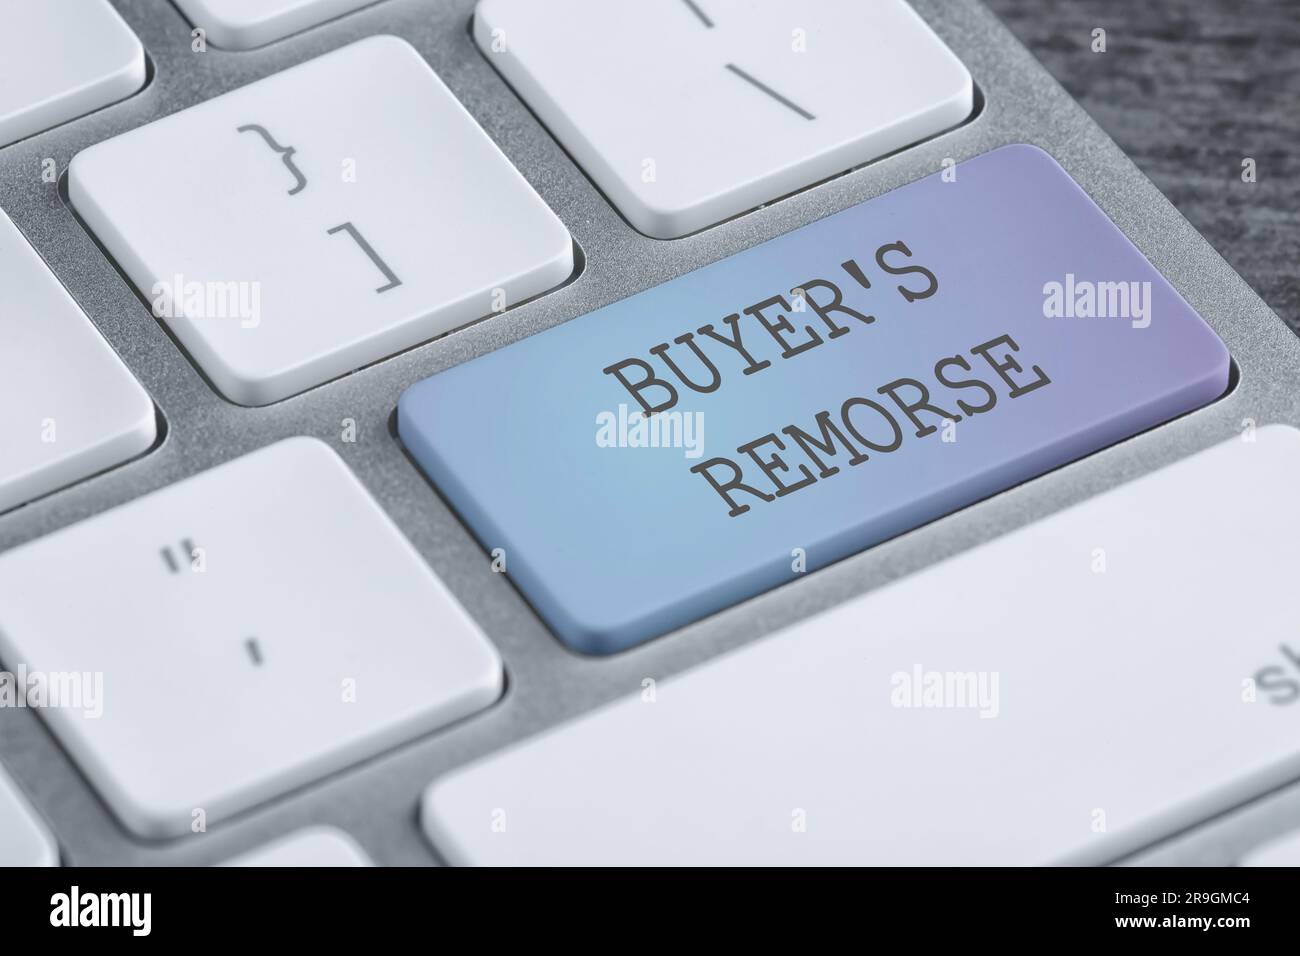 Button with text Buyer's Remorse on computer keyboard, closeup Stock Photo